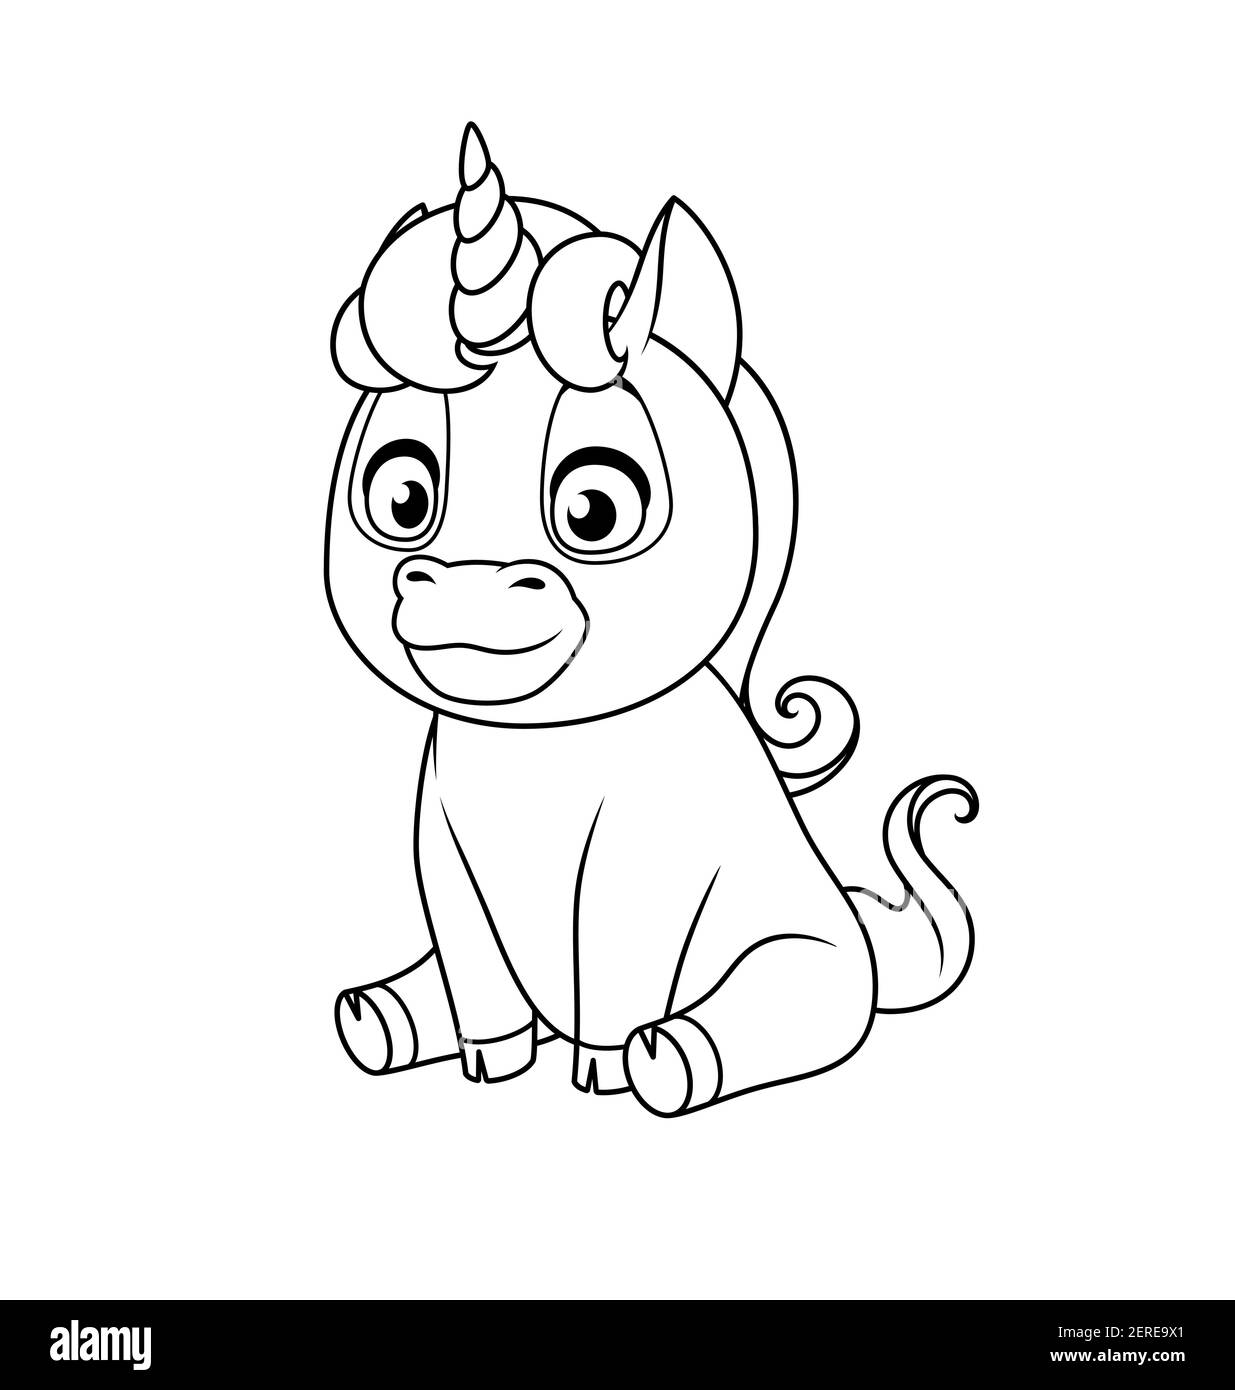 Cute baby unicorn sitting vector coloring page stock vector image art